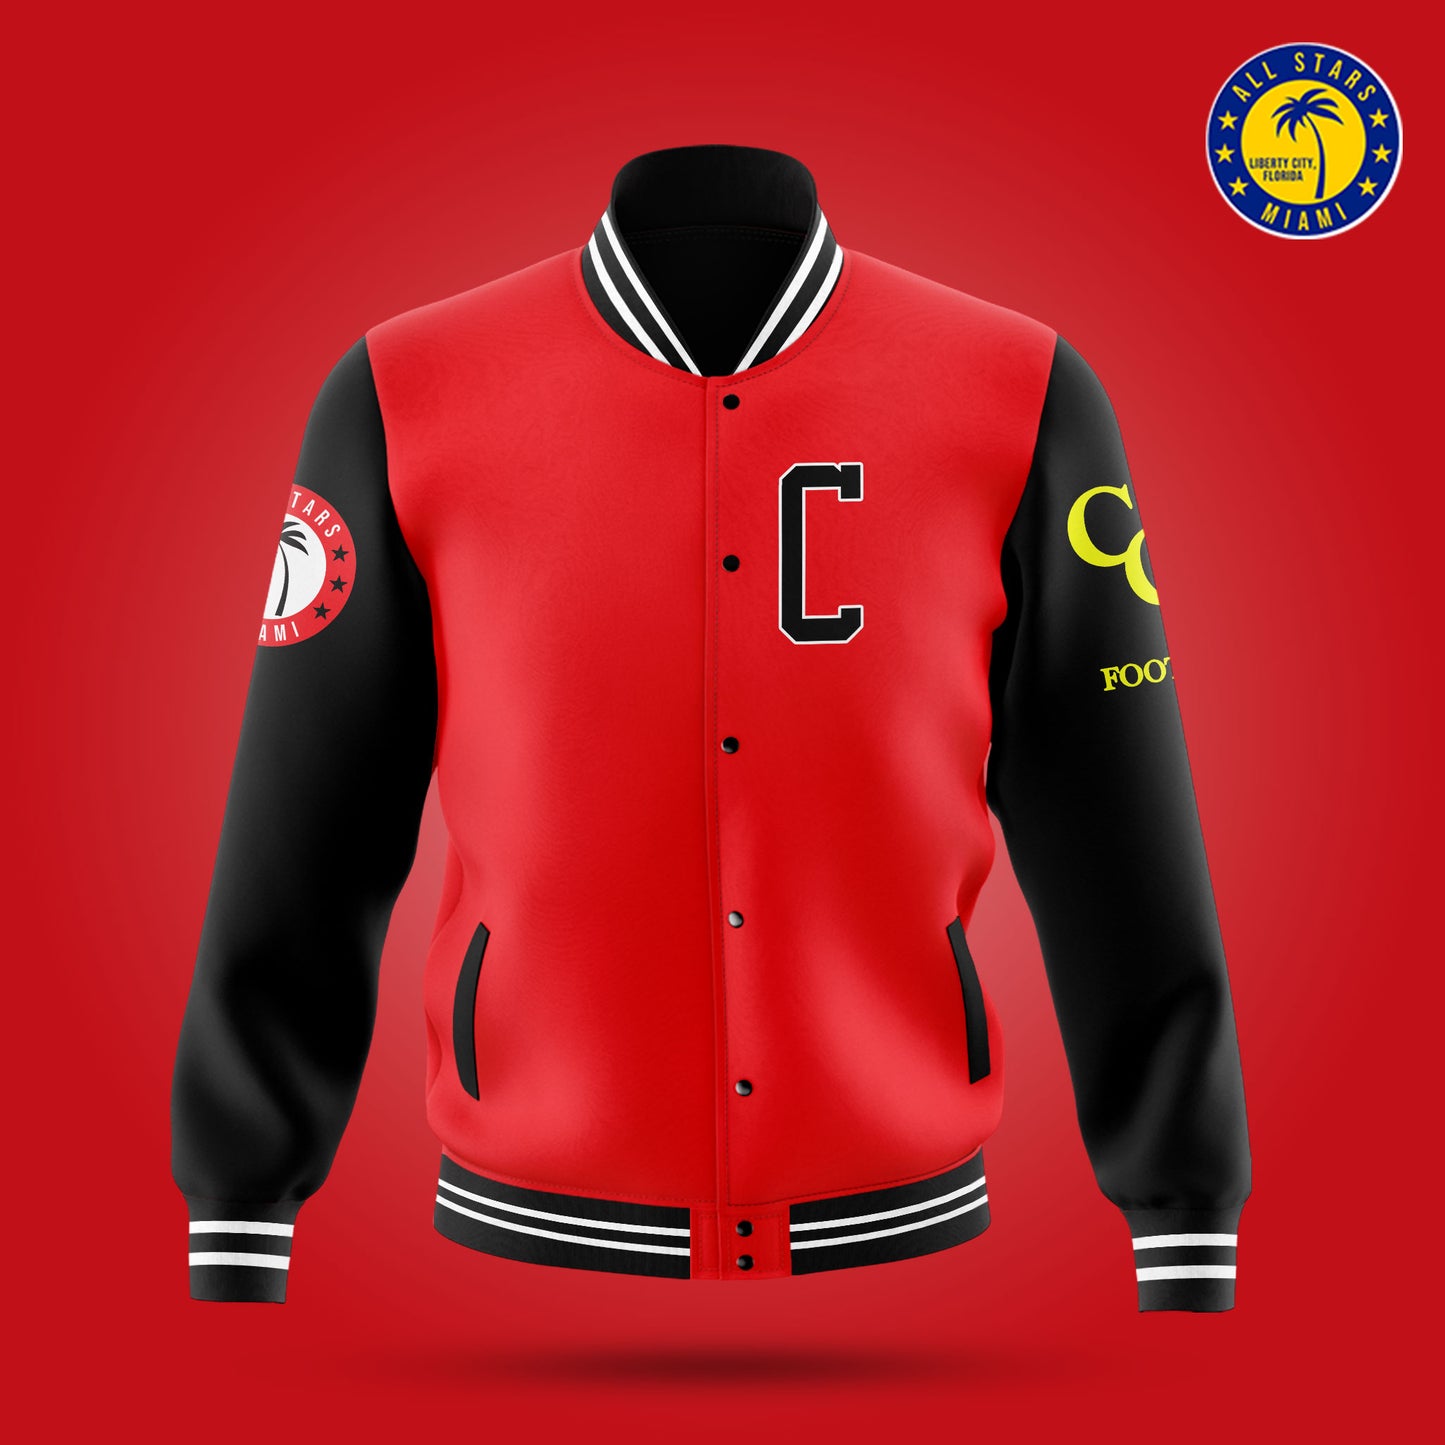 CLEARWATER CENTRAL CATHOLIC VARSITY LETTERMAN JACKET